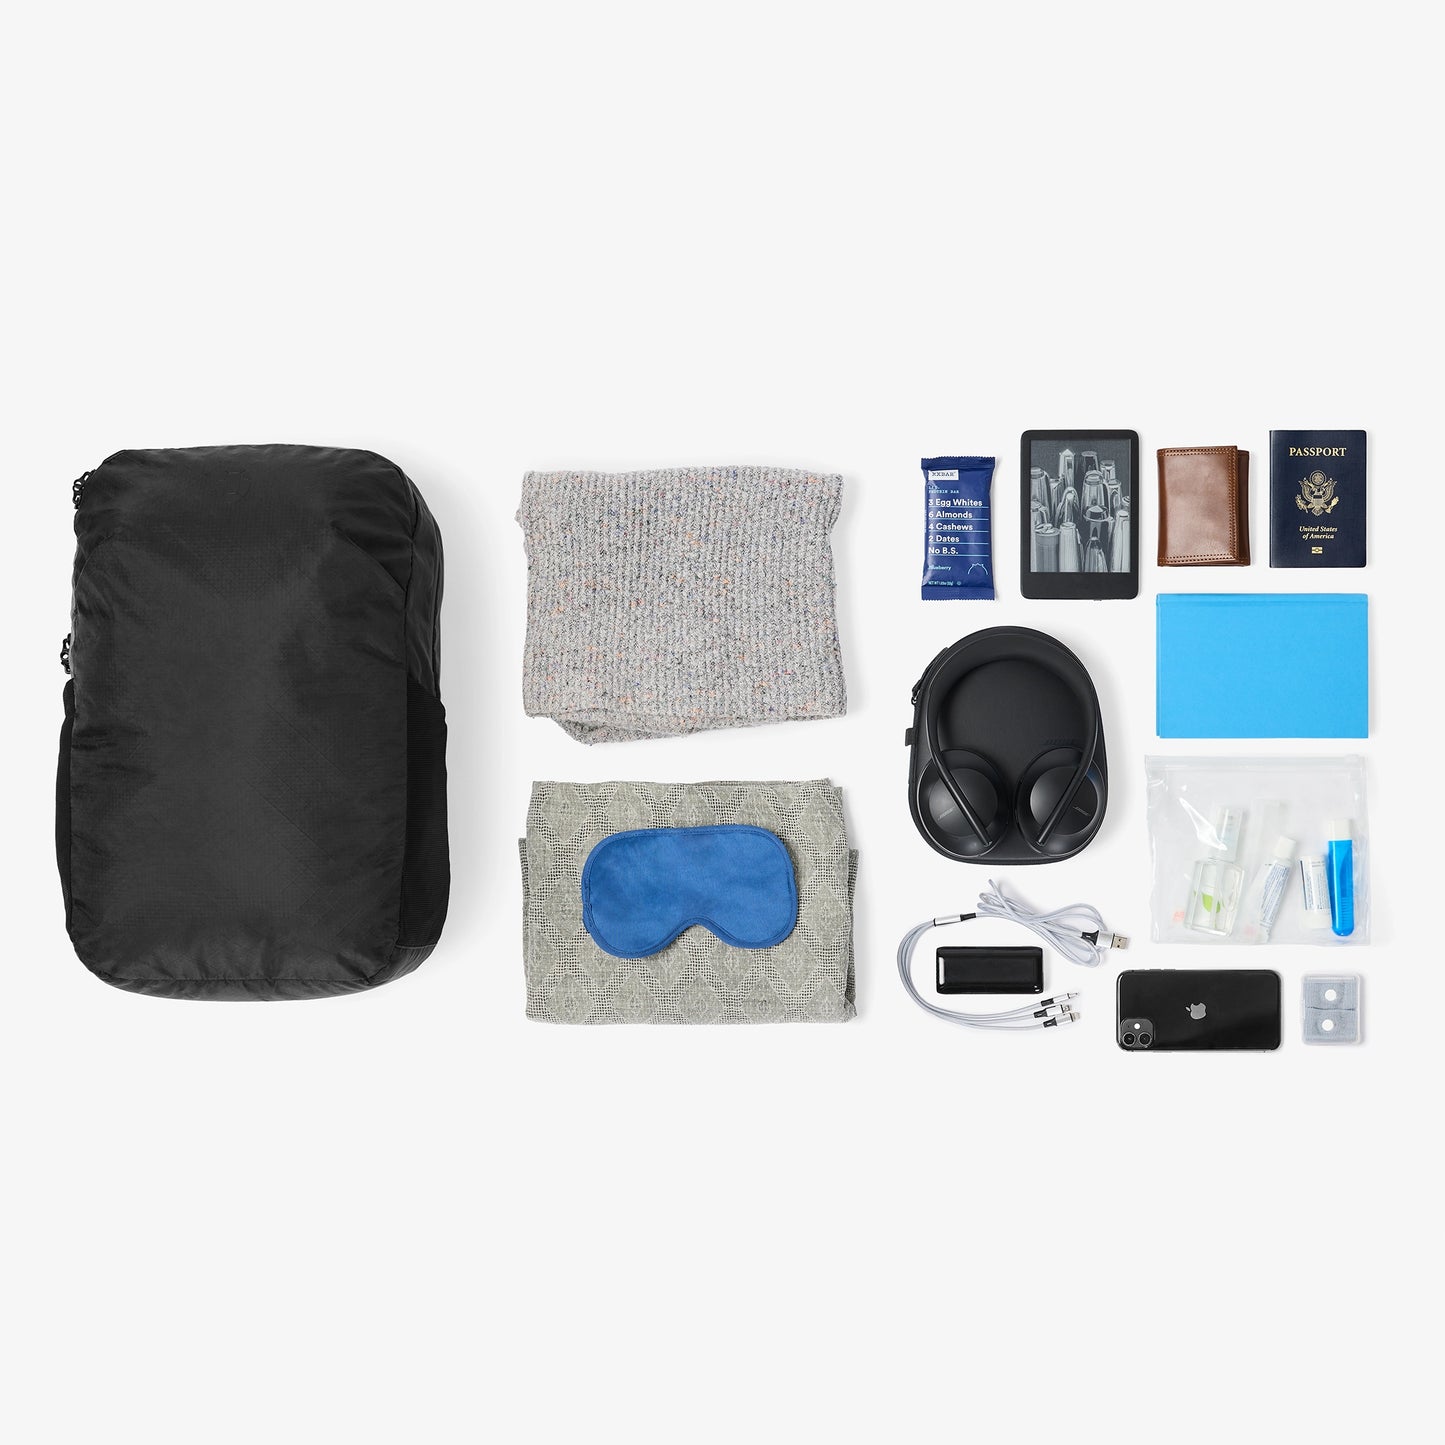 Pack for a travel day